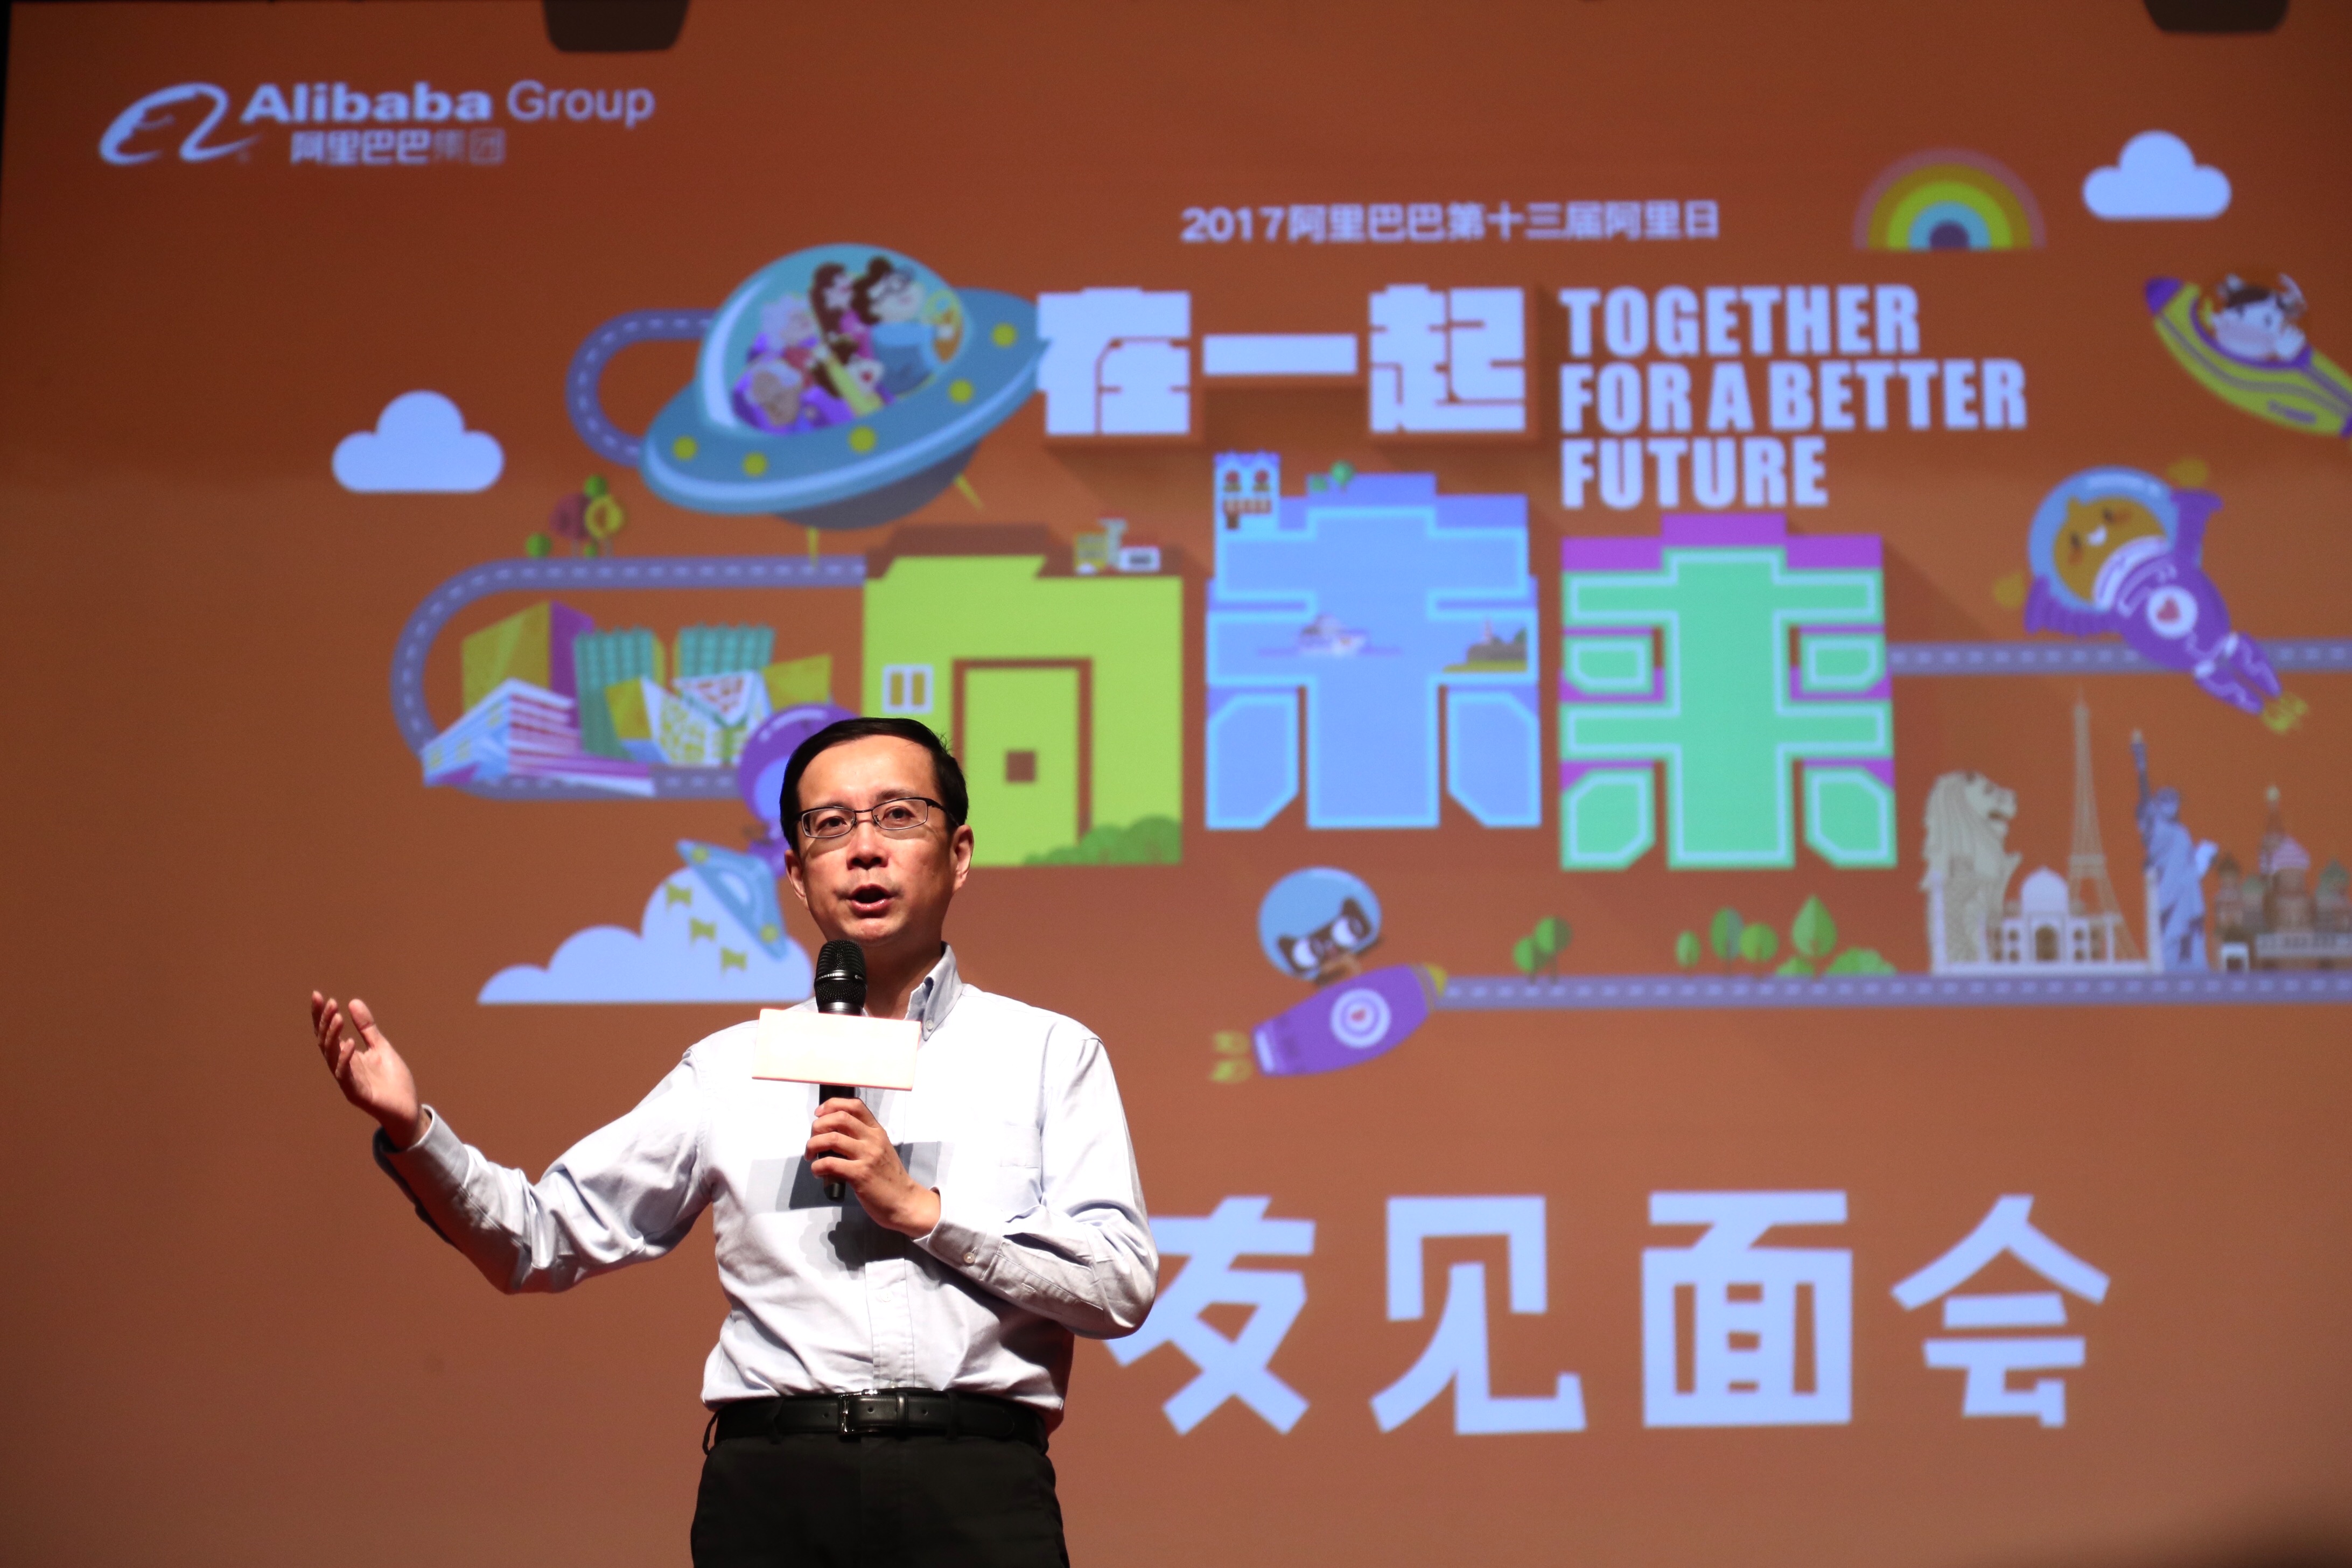 Alibaba CEO Daniel Zhang speaks during an event for the 13th Ali Day in Alibaba headquarters in Hangzhou on May 10, 2017. [Photo provided by Alibaba Group]